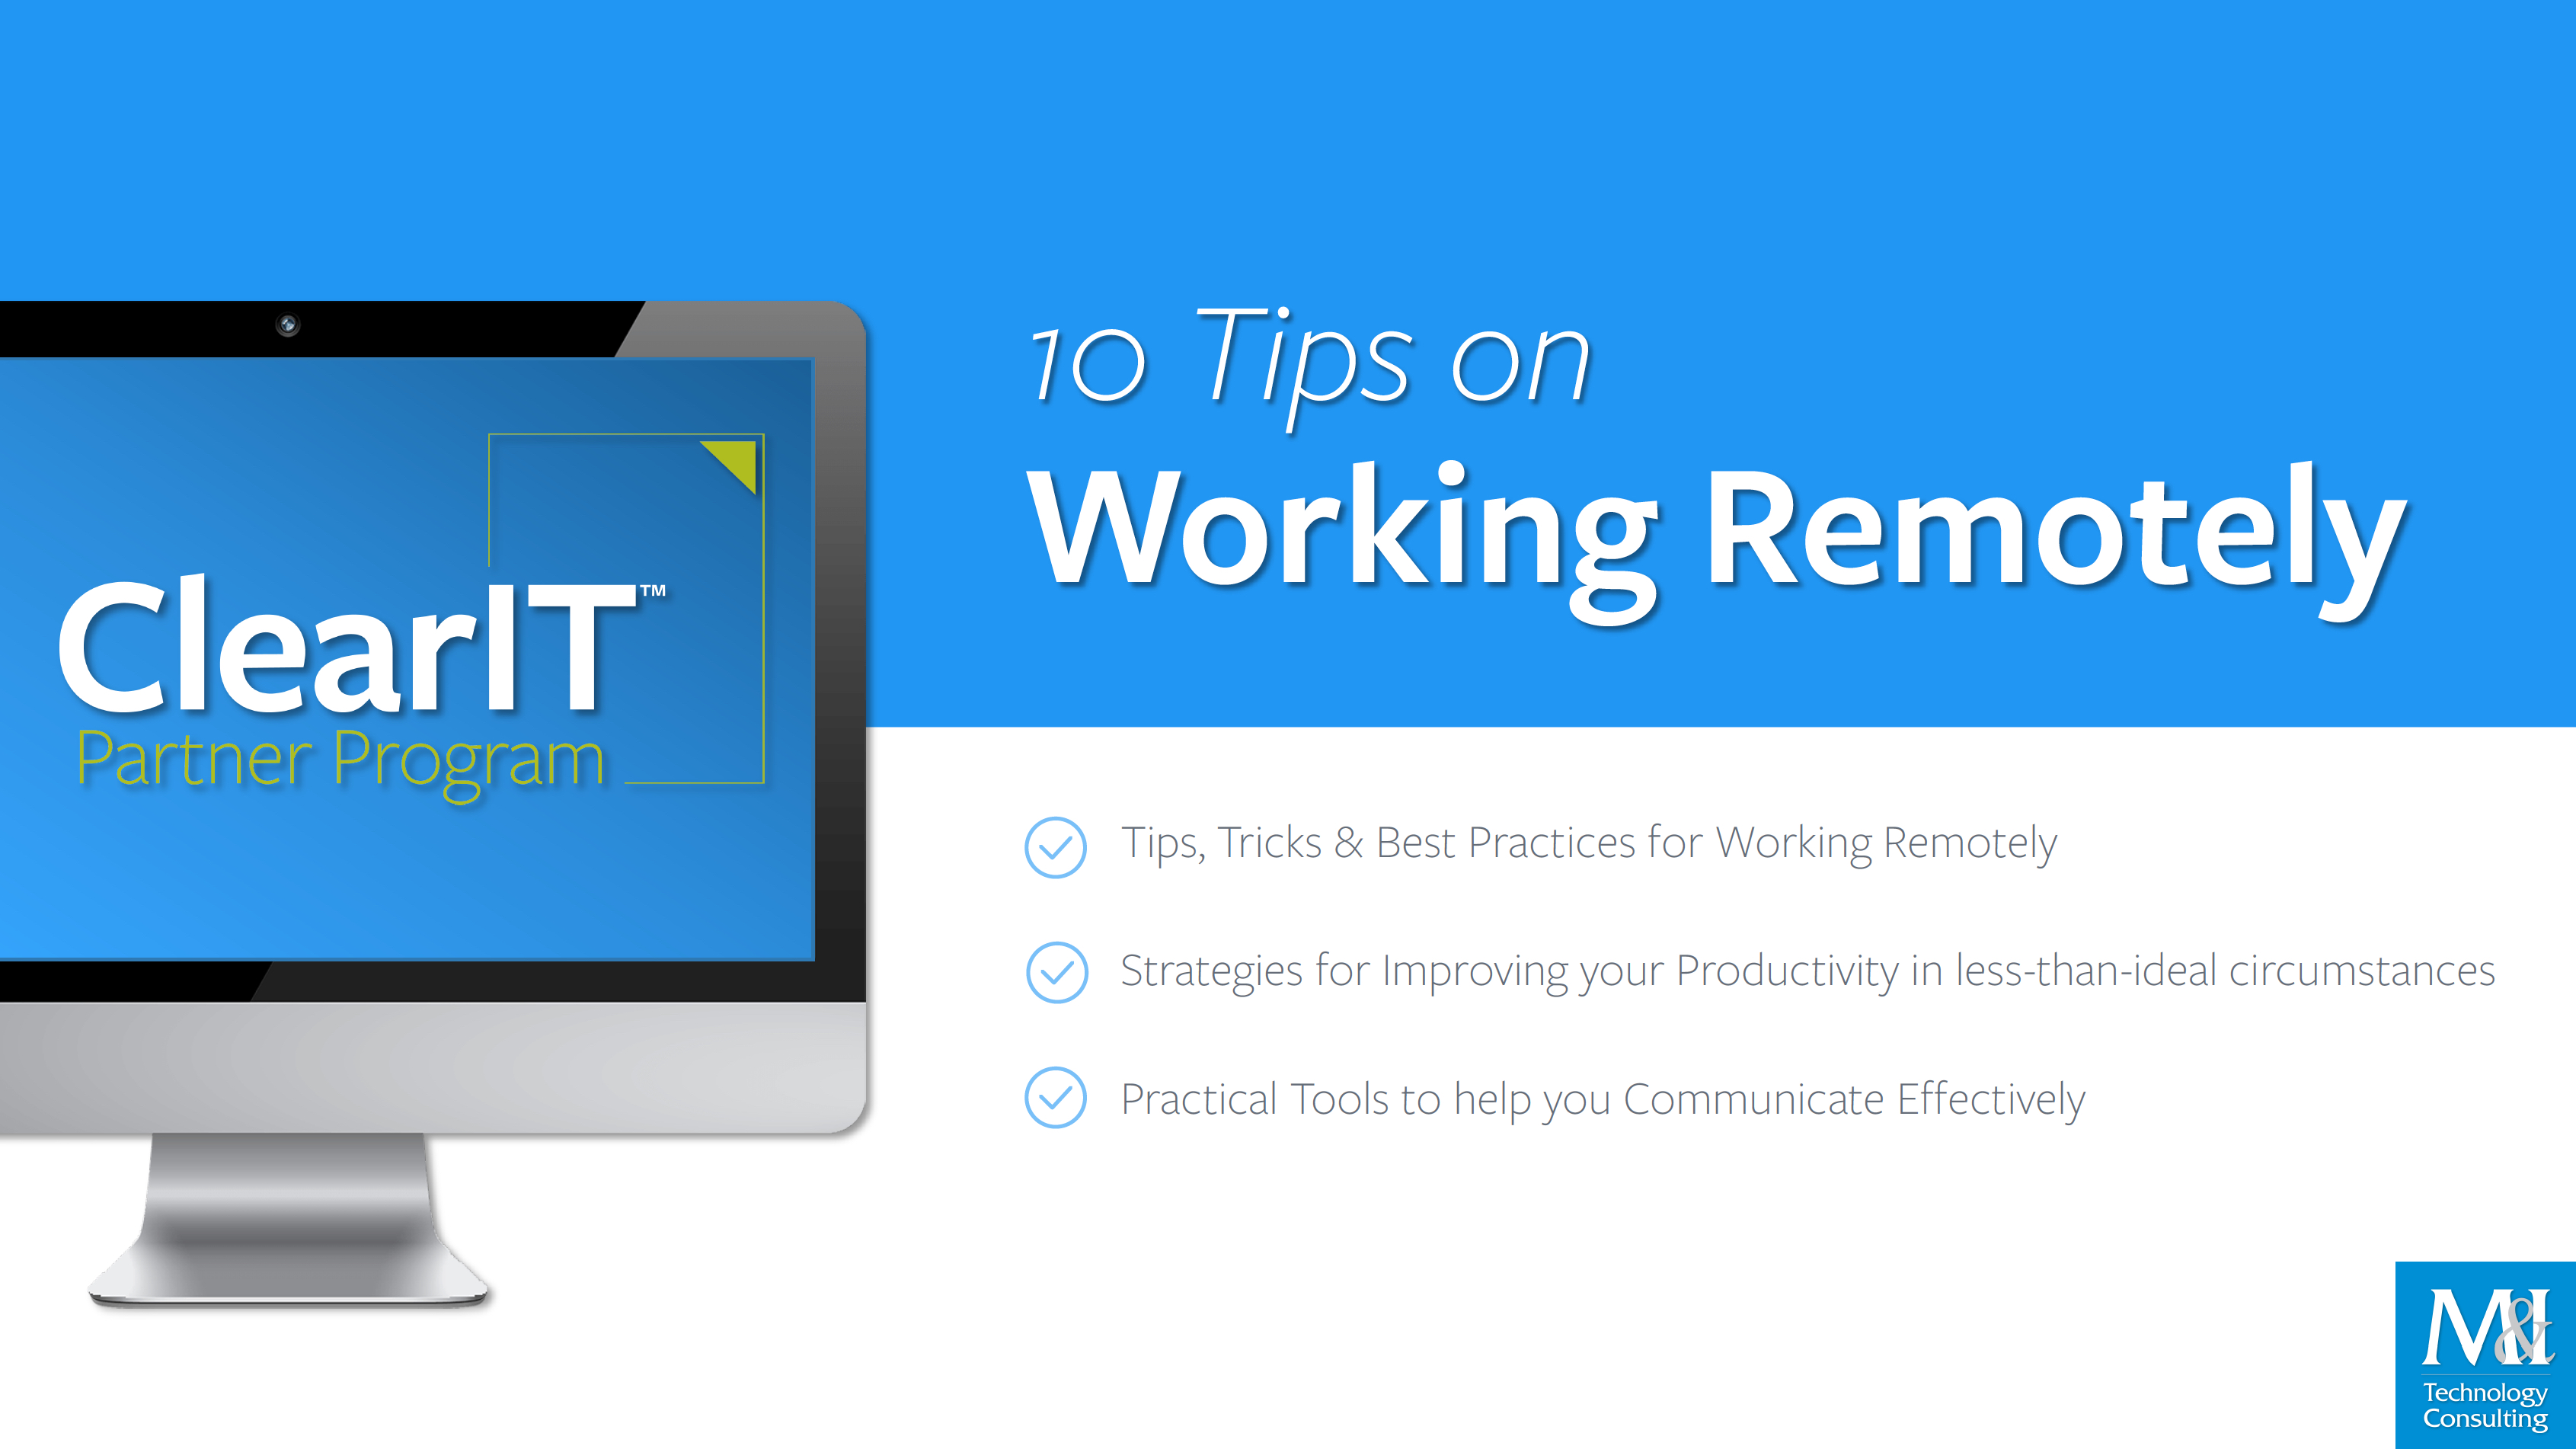 10-tips-on-working-remotely (1)